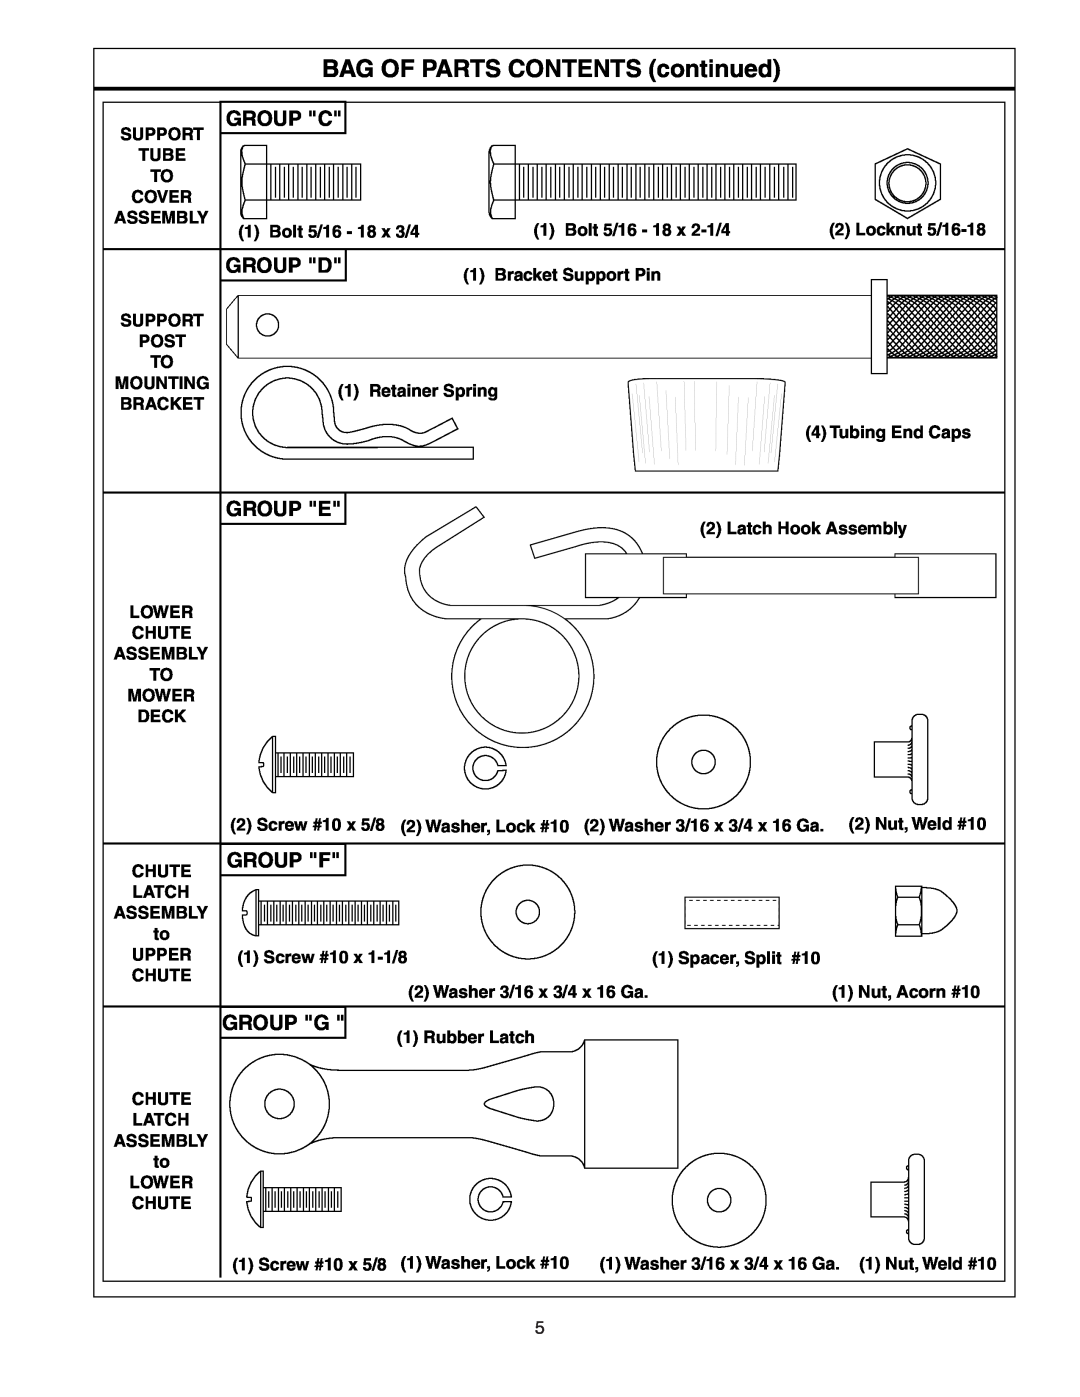 Poulan 156239, CL46B, 954 04 06-06 owner manual BAG OF PARTS CONTENTS continued, Group C, Group D, Group E, Group F, Group G 